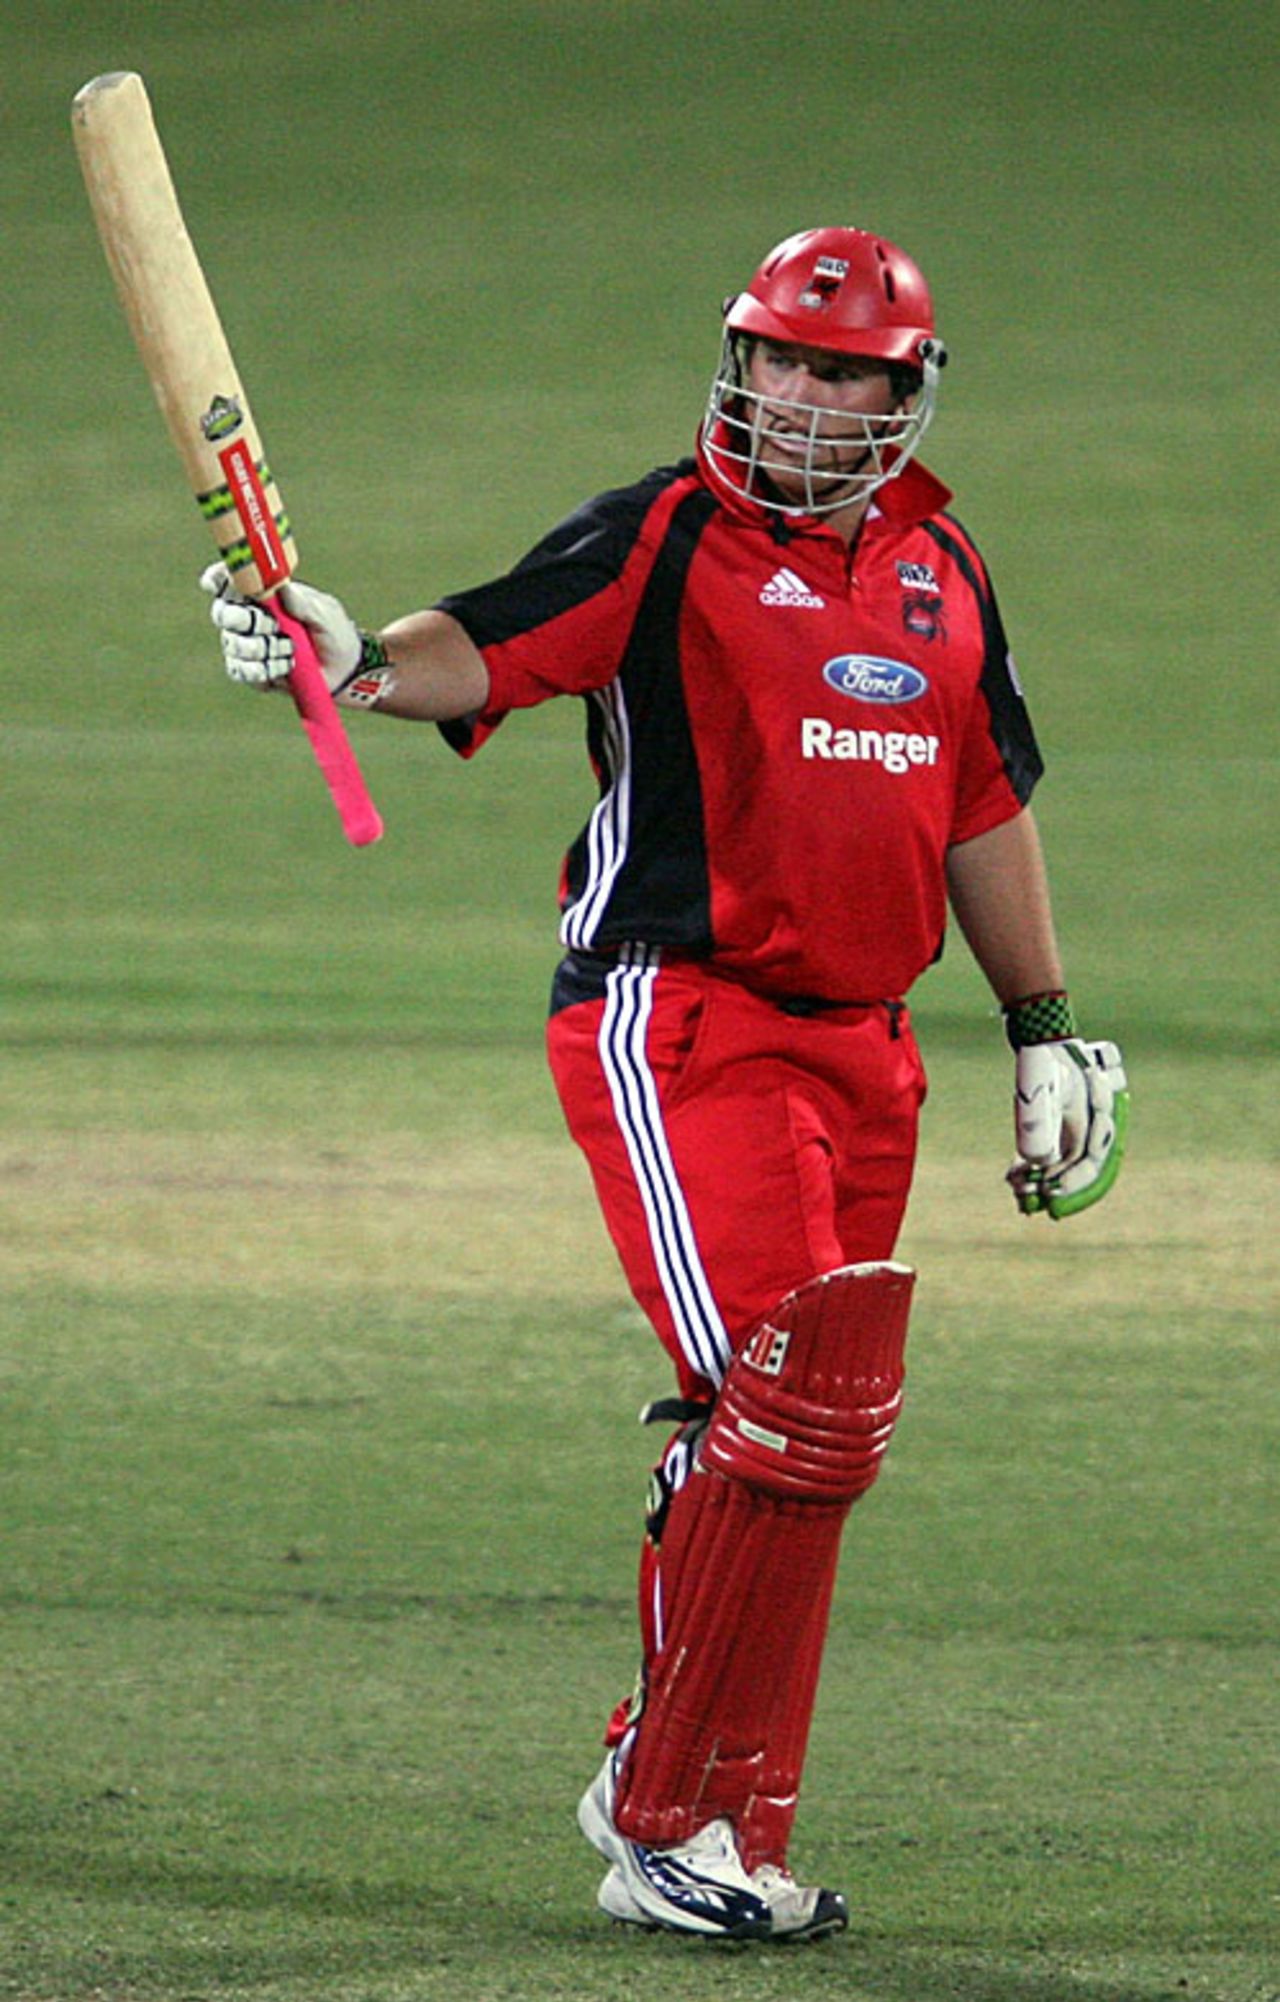 Mark Cosgrove scored 92 in South Australia's chase, South Australia v Victoria, Ford Ranger Cup, Adelaide, October 19, 2007